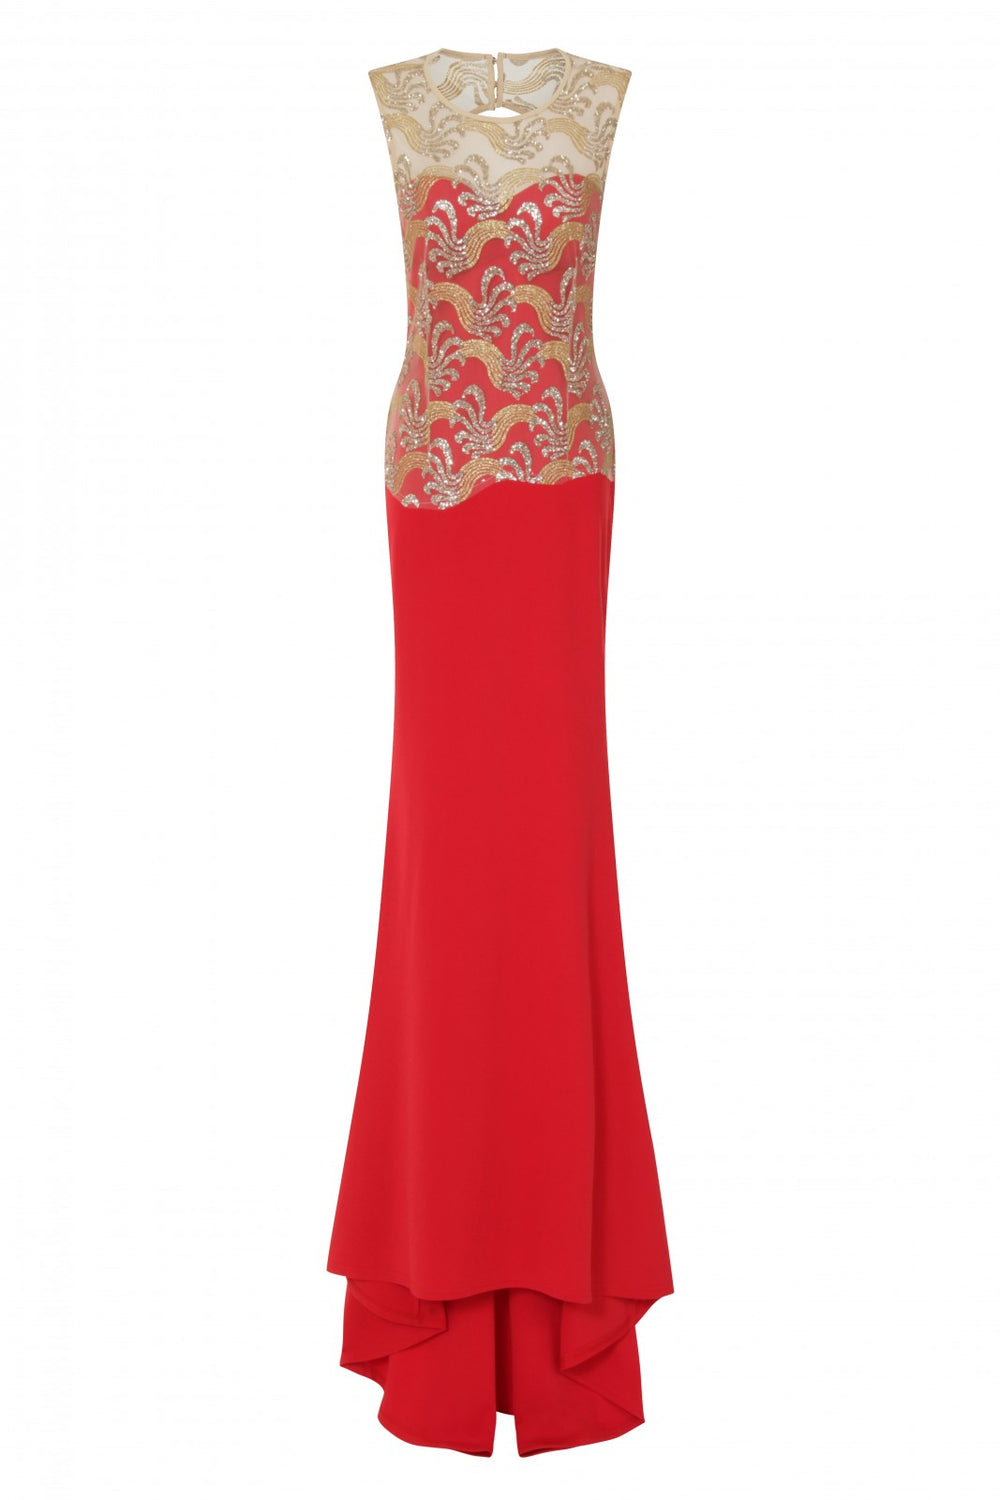 Divinity Sparkle Red Slinky Backless Fishtail Maxi Dress